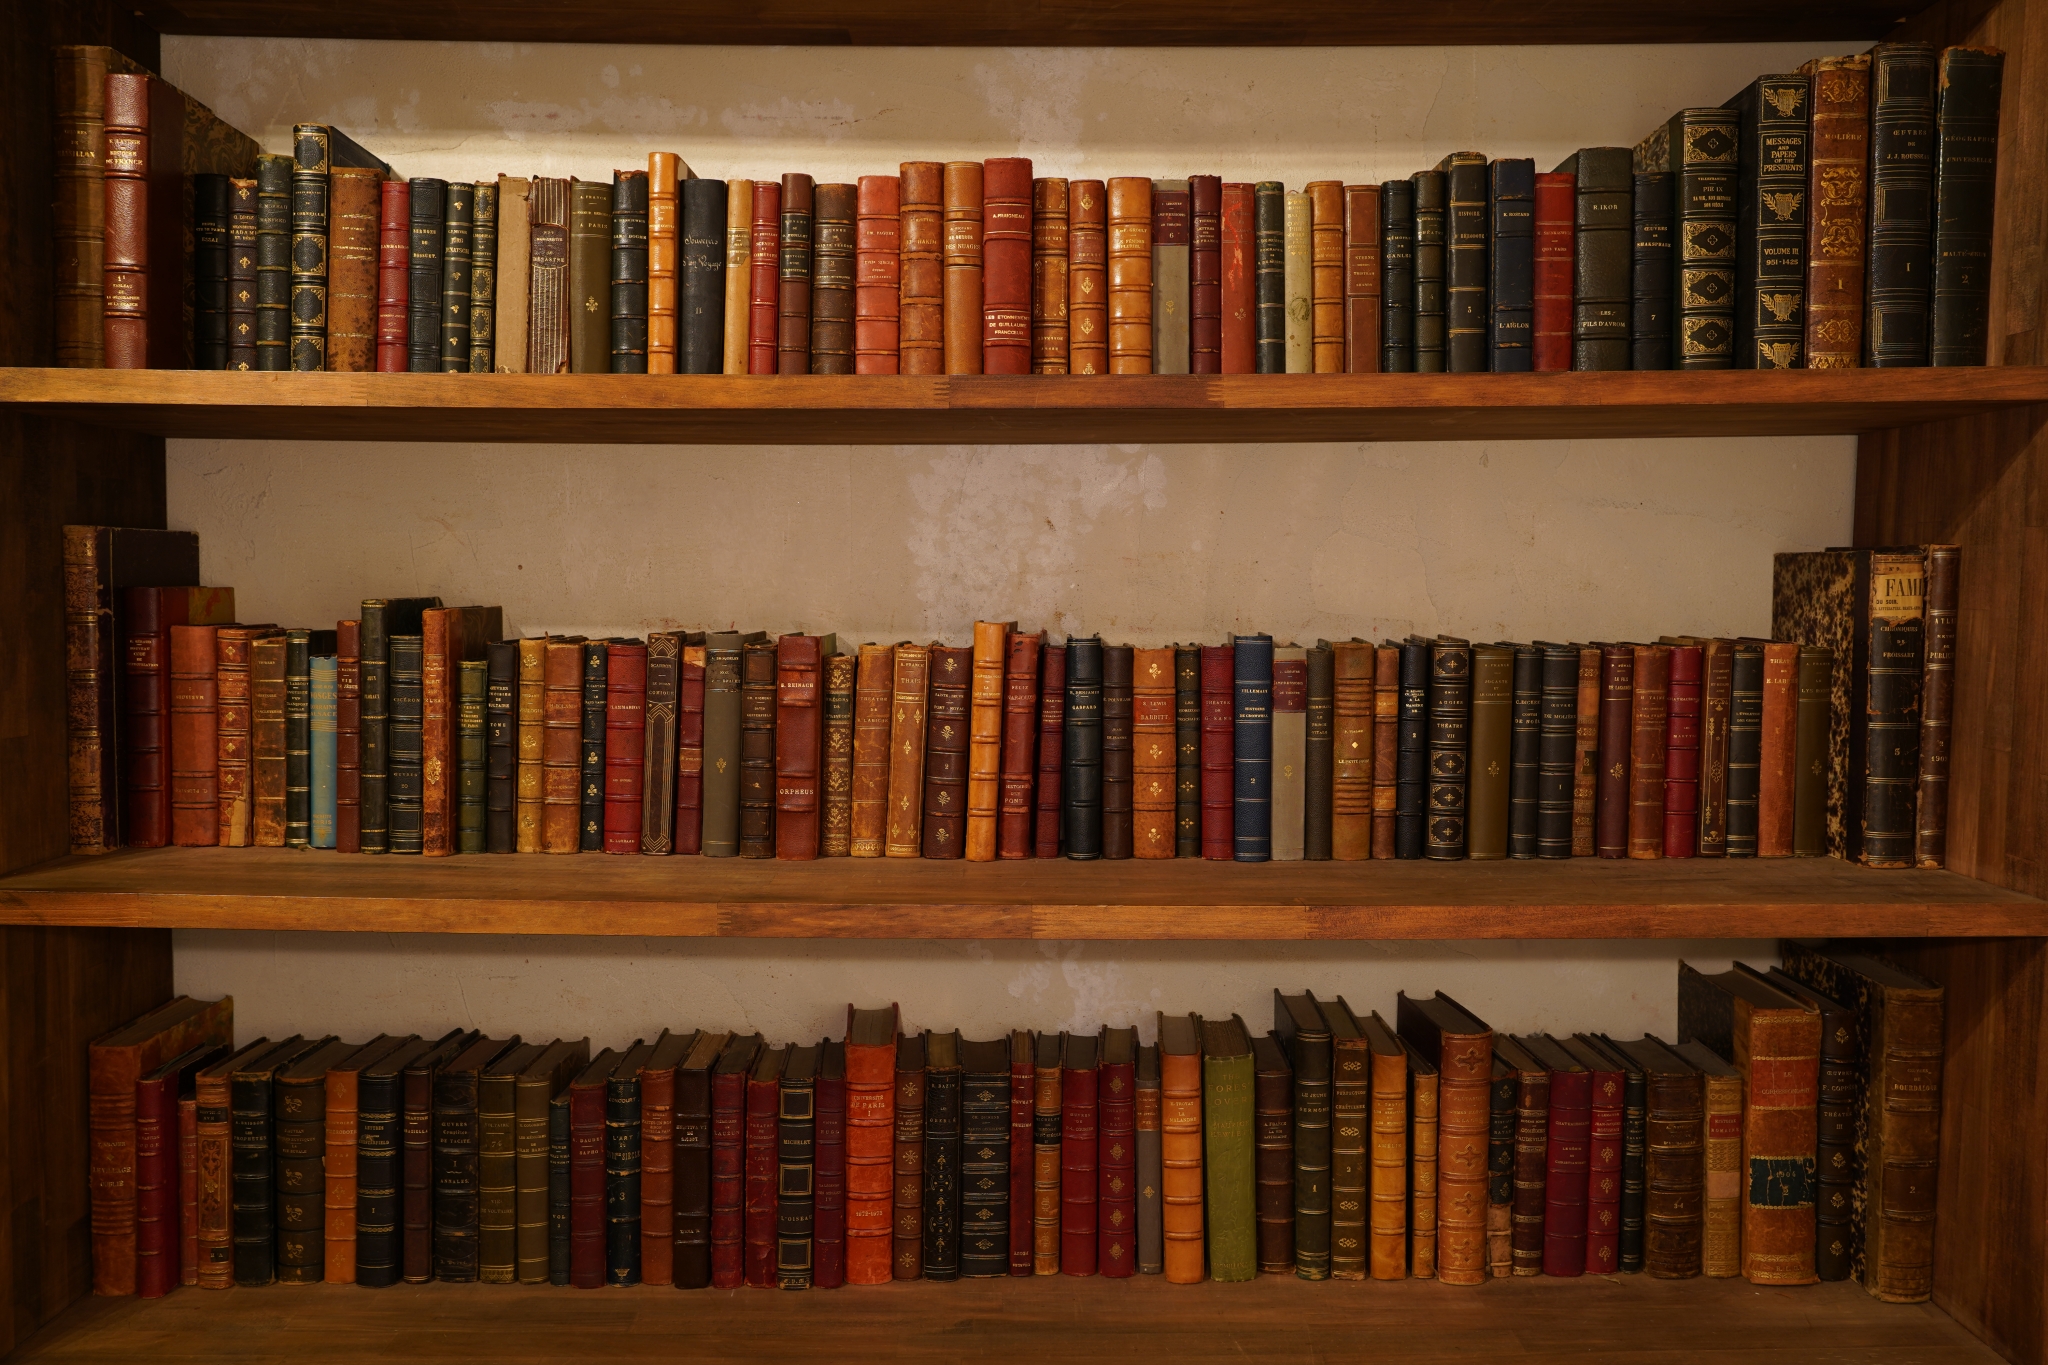 Leather-bound books lined up on shelves